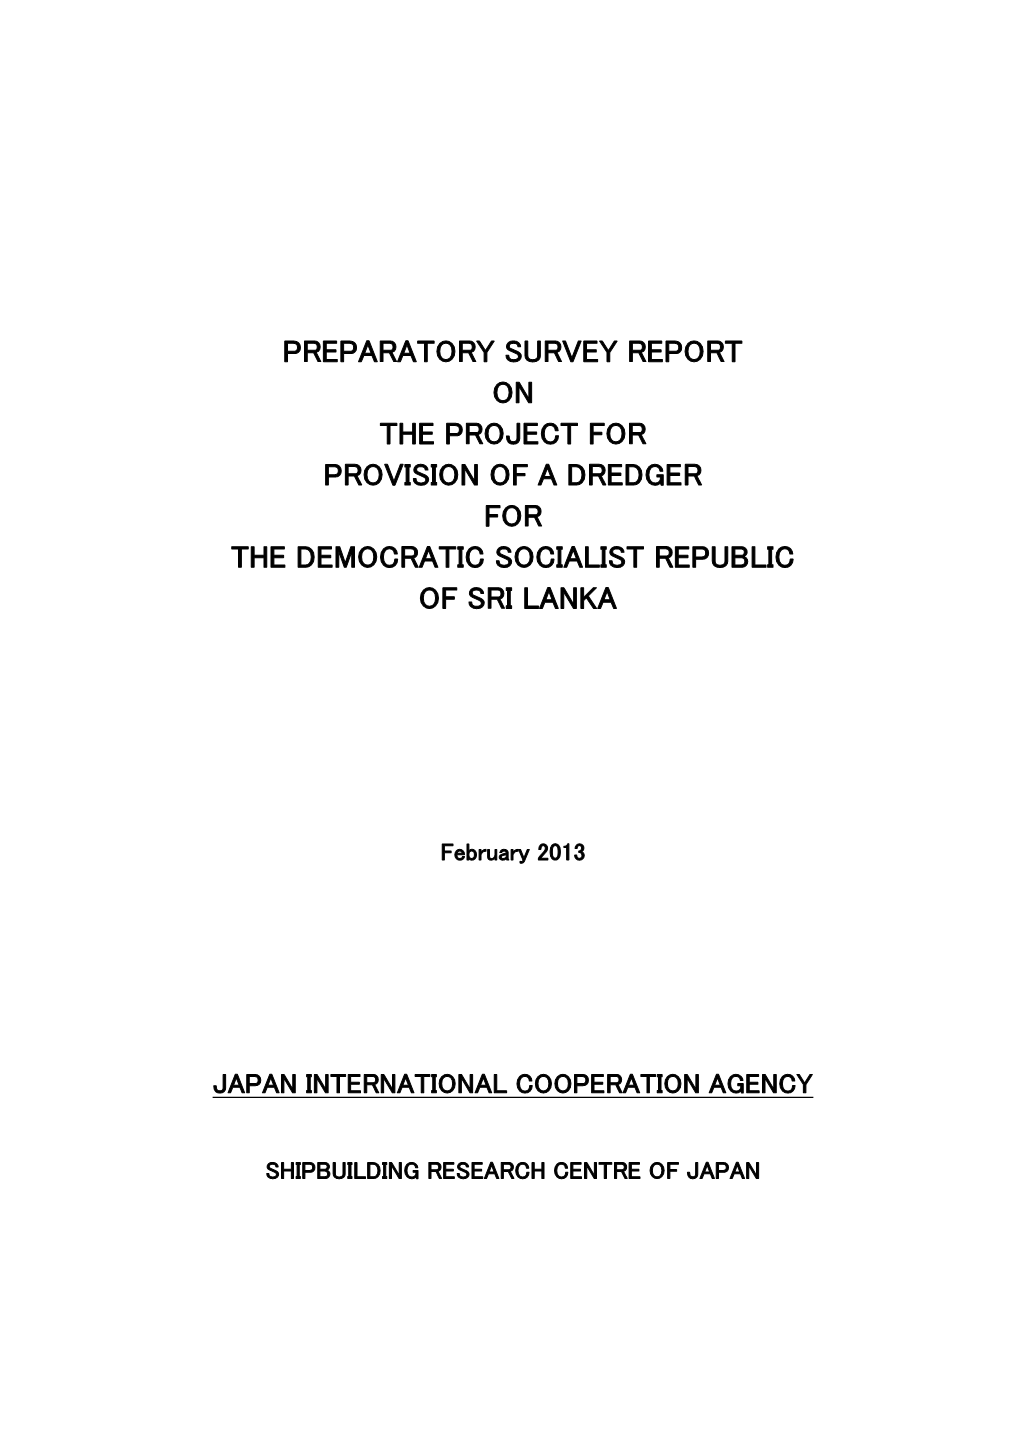 Preparatory Survey Report on the Project for Provision of a Dredger for the Democratic Socialist Republic of Sri Lanka